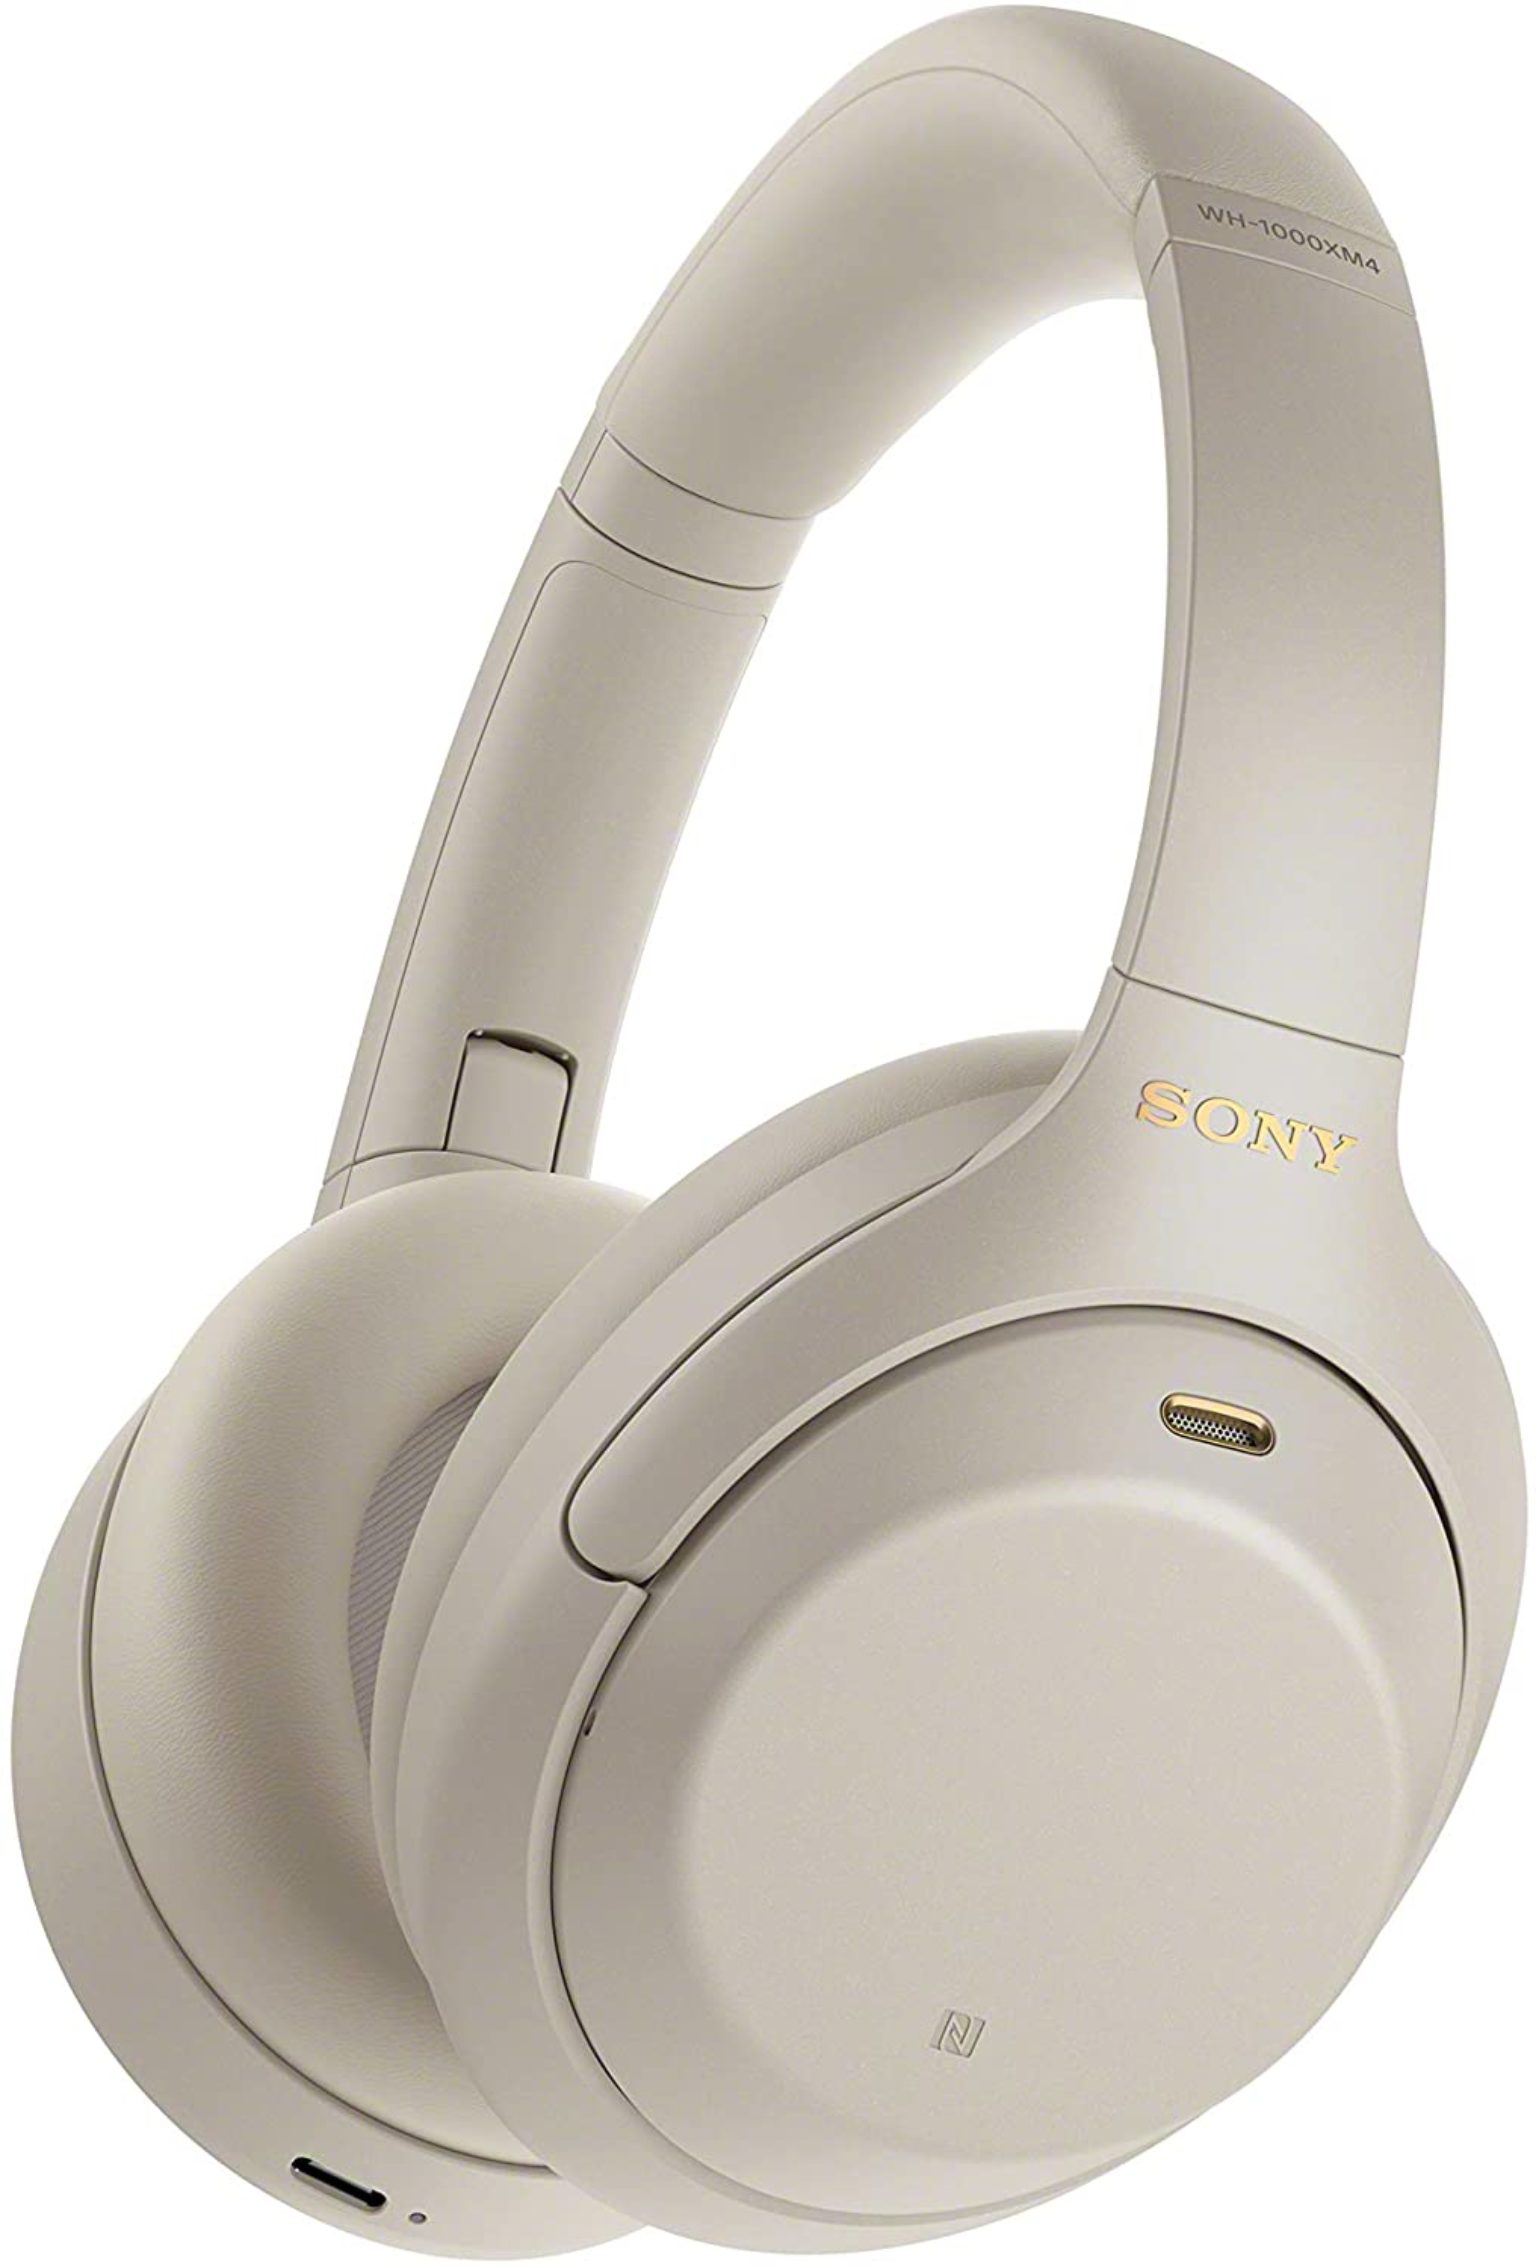 Trying To Find The Perfect Gift? Check Out These Sony Headphones | The